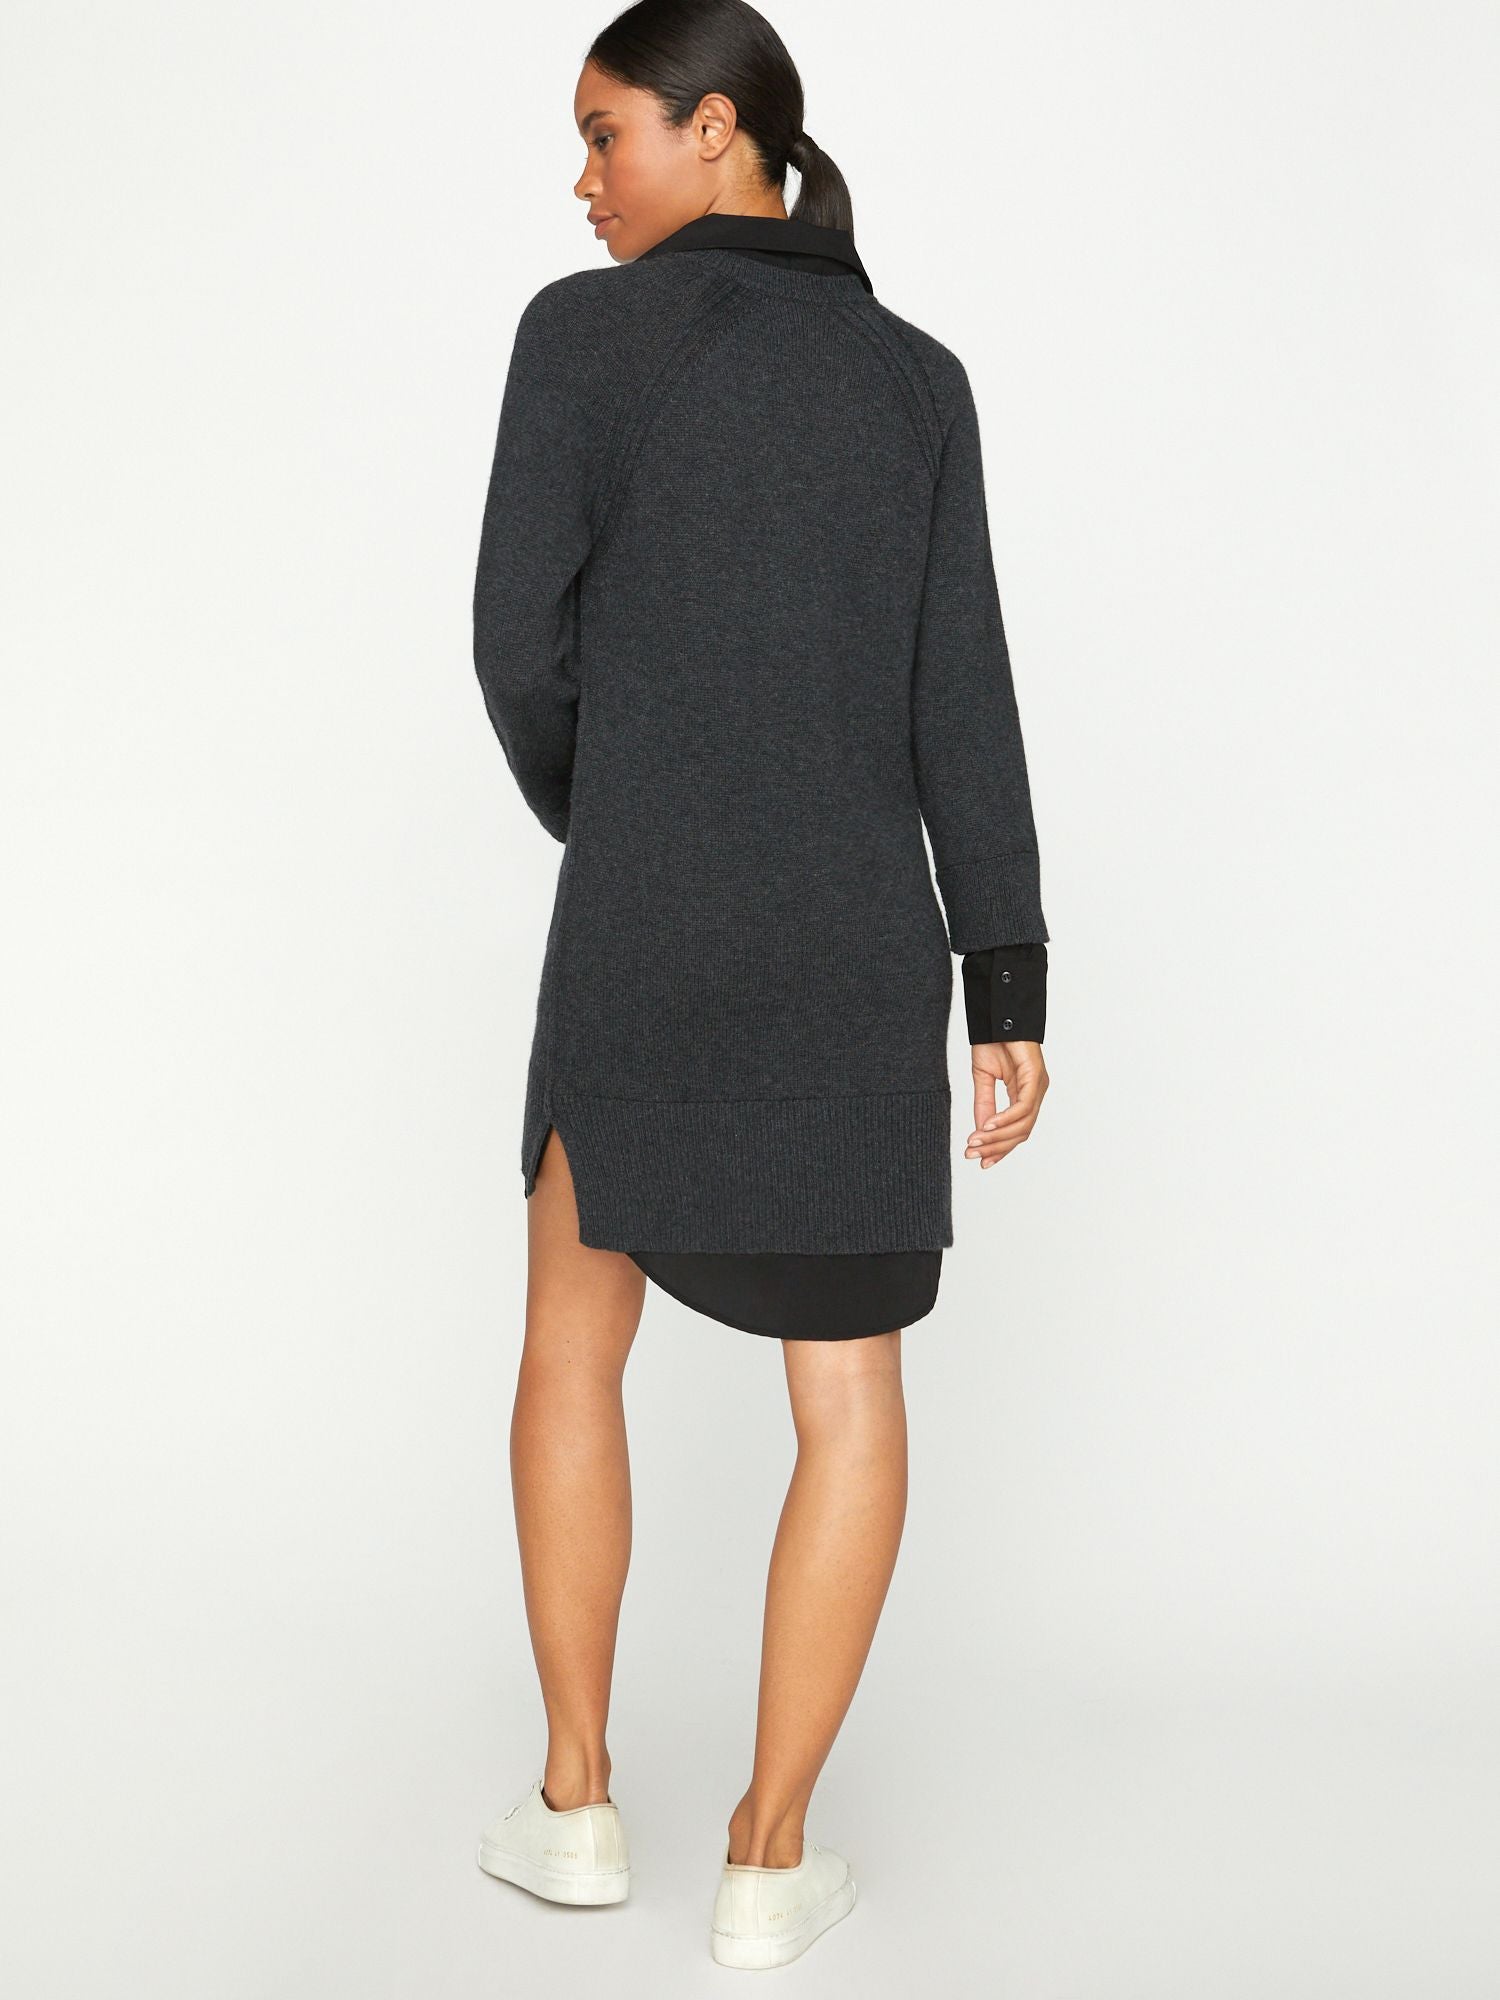 Looker layered v-neck grey and black mini sweater dress back view